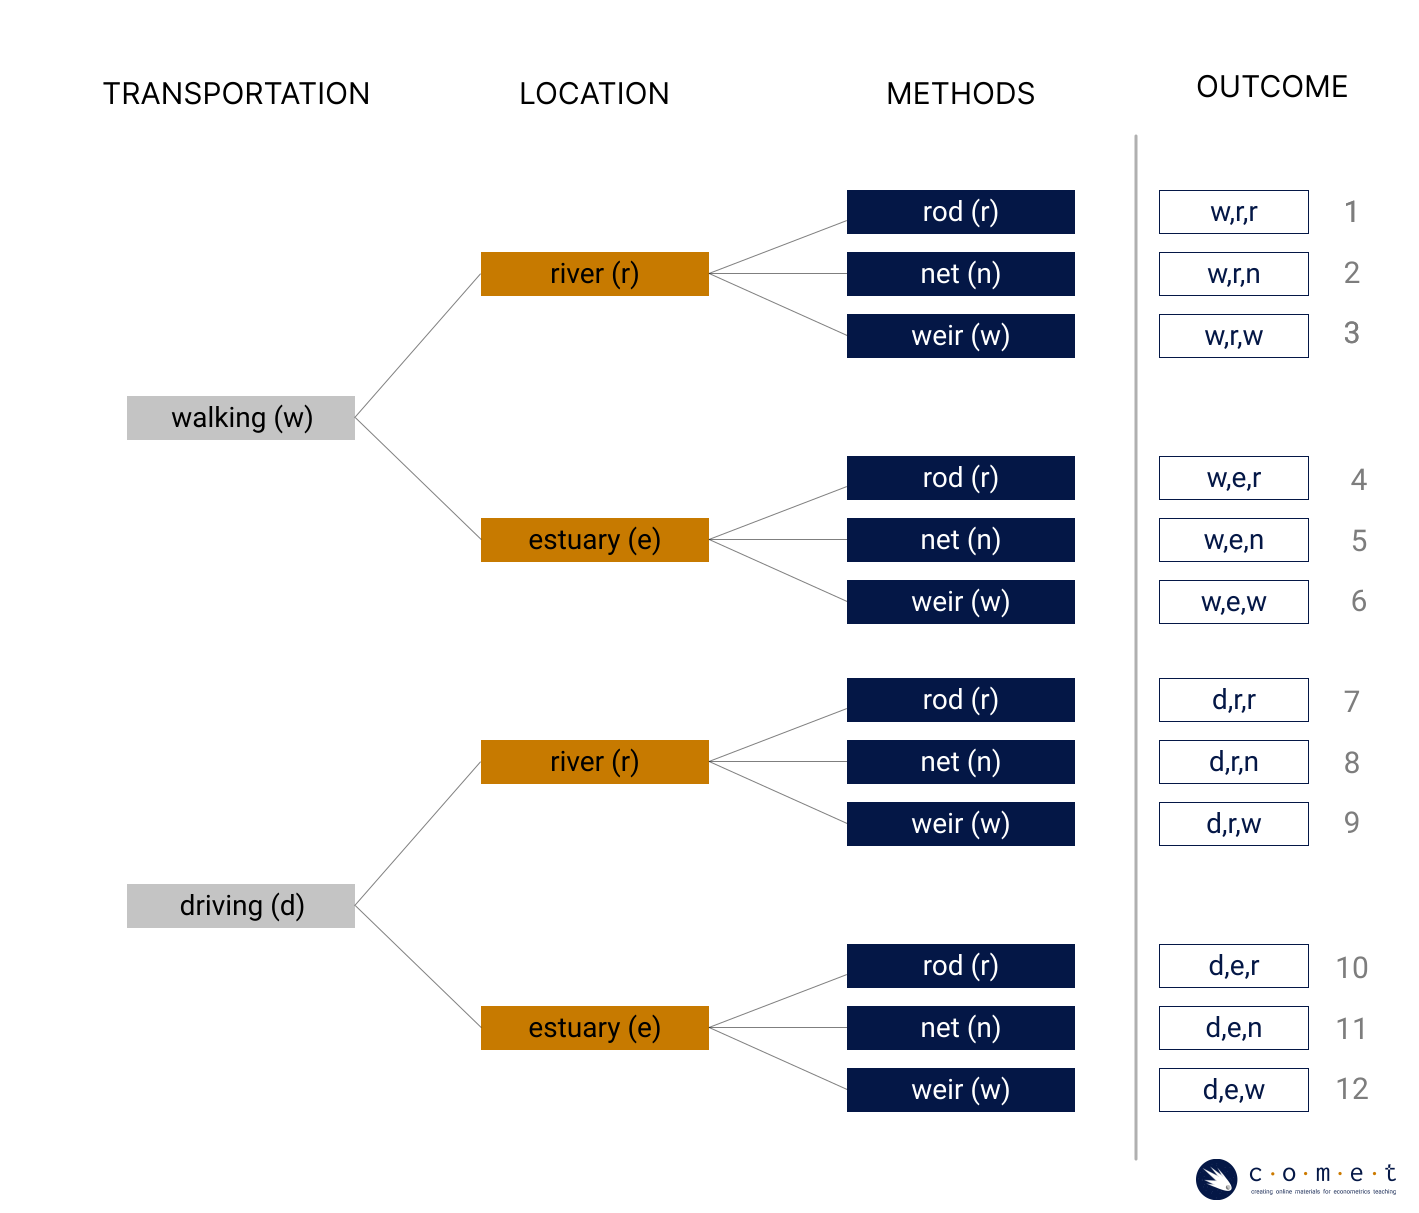 A tree diagram summarizing all 12 possible outcomes fishing trips from the list of options.